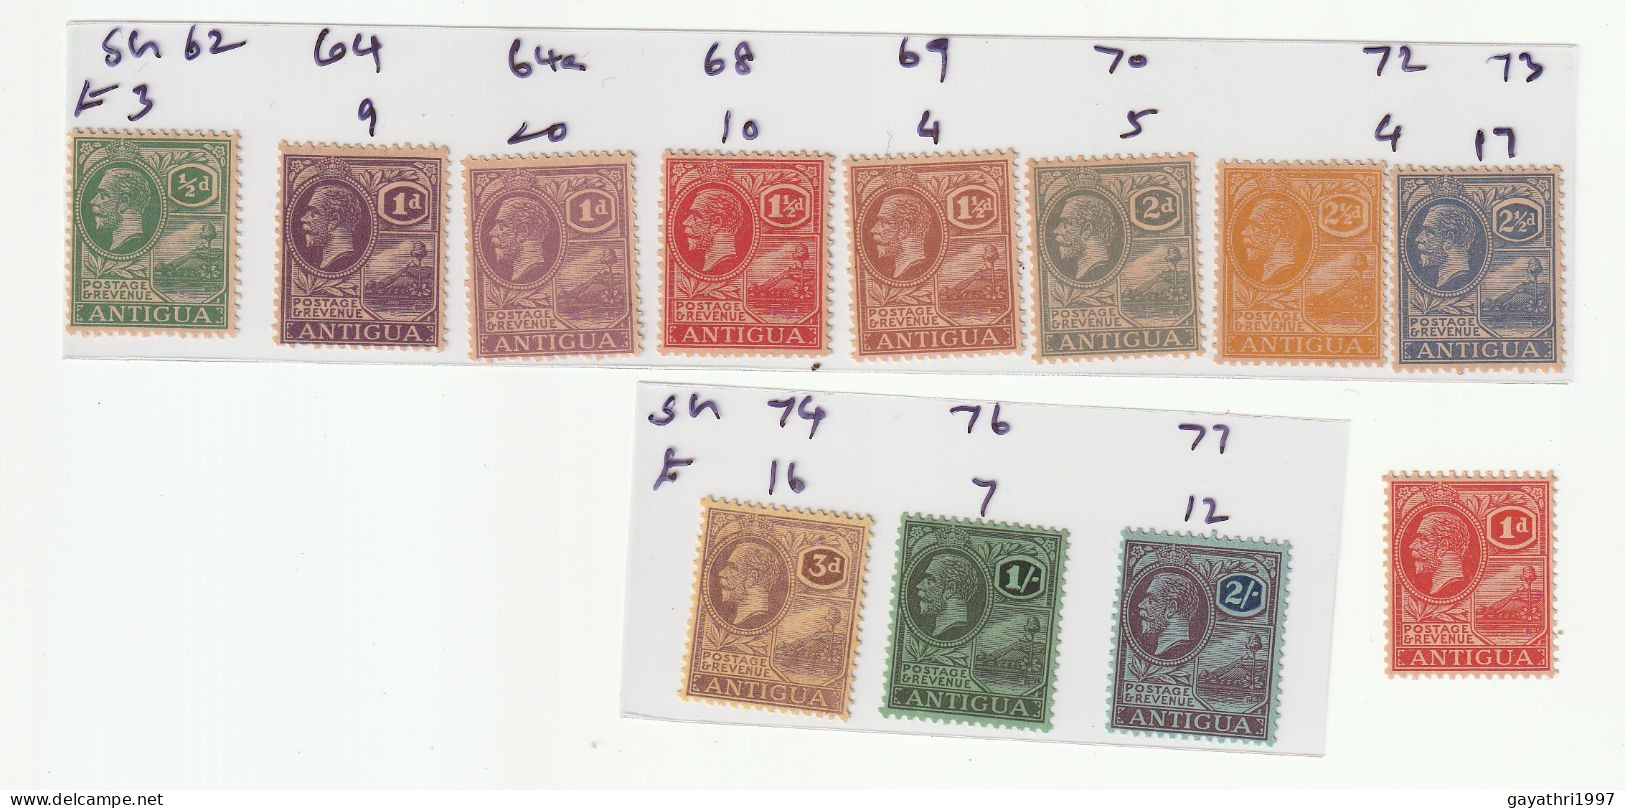 Antigua 1921 SG 62 -77 SET OF 12 STAMPS ( PART OF SET ) MINT MNH GOOD CONDITION (SH 90) - 1858-1960 Crown Colony